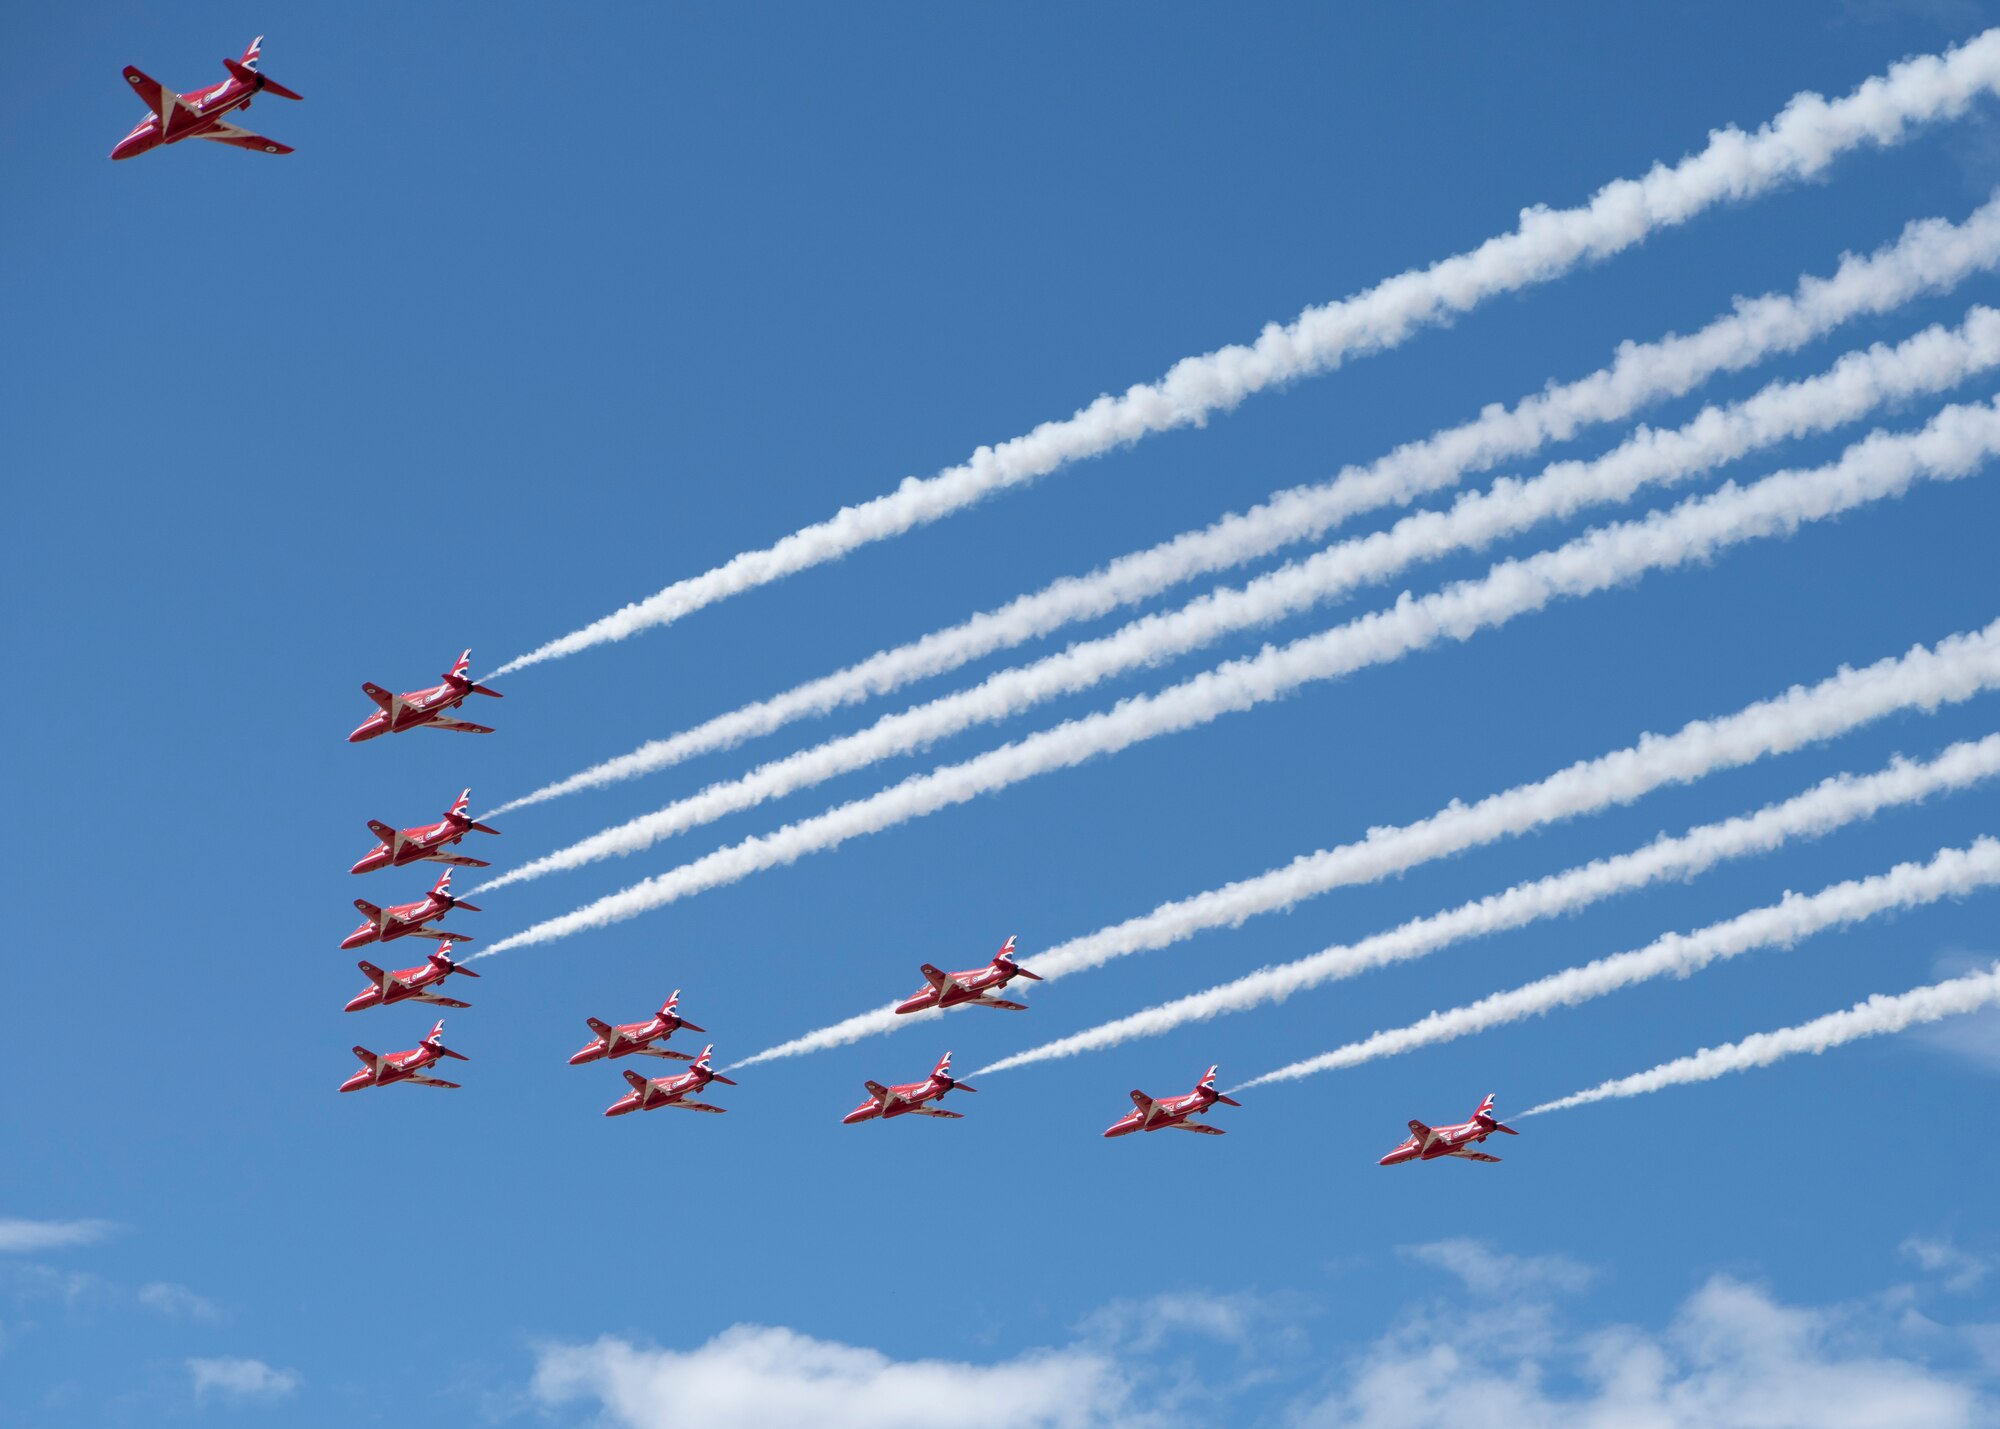 Royal Air Force aerial demonstration team the Red Arrows flies past Peterson Air Force Base, Colorado, before landing Sept. 16, 2019. The team stopped at the base as part of their North American tour. (U.S. Air Force photo by Heather Heiney)